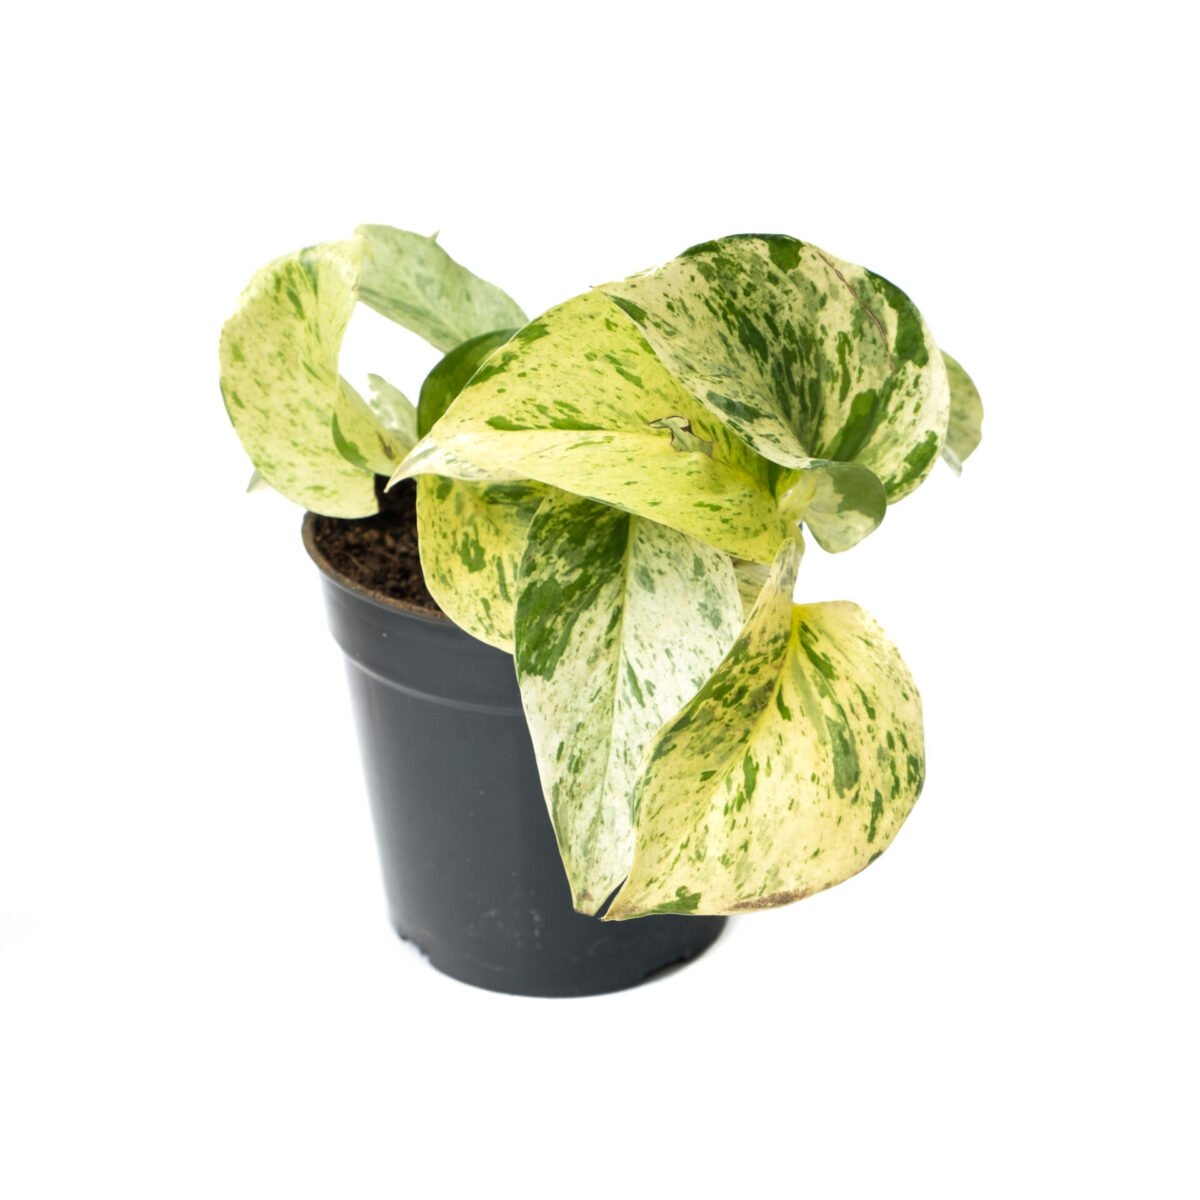 Bagh Marble Queen Pothos